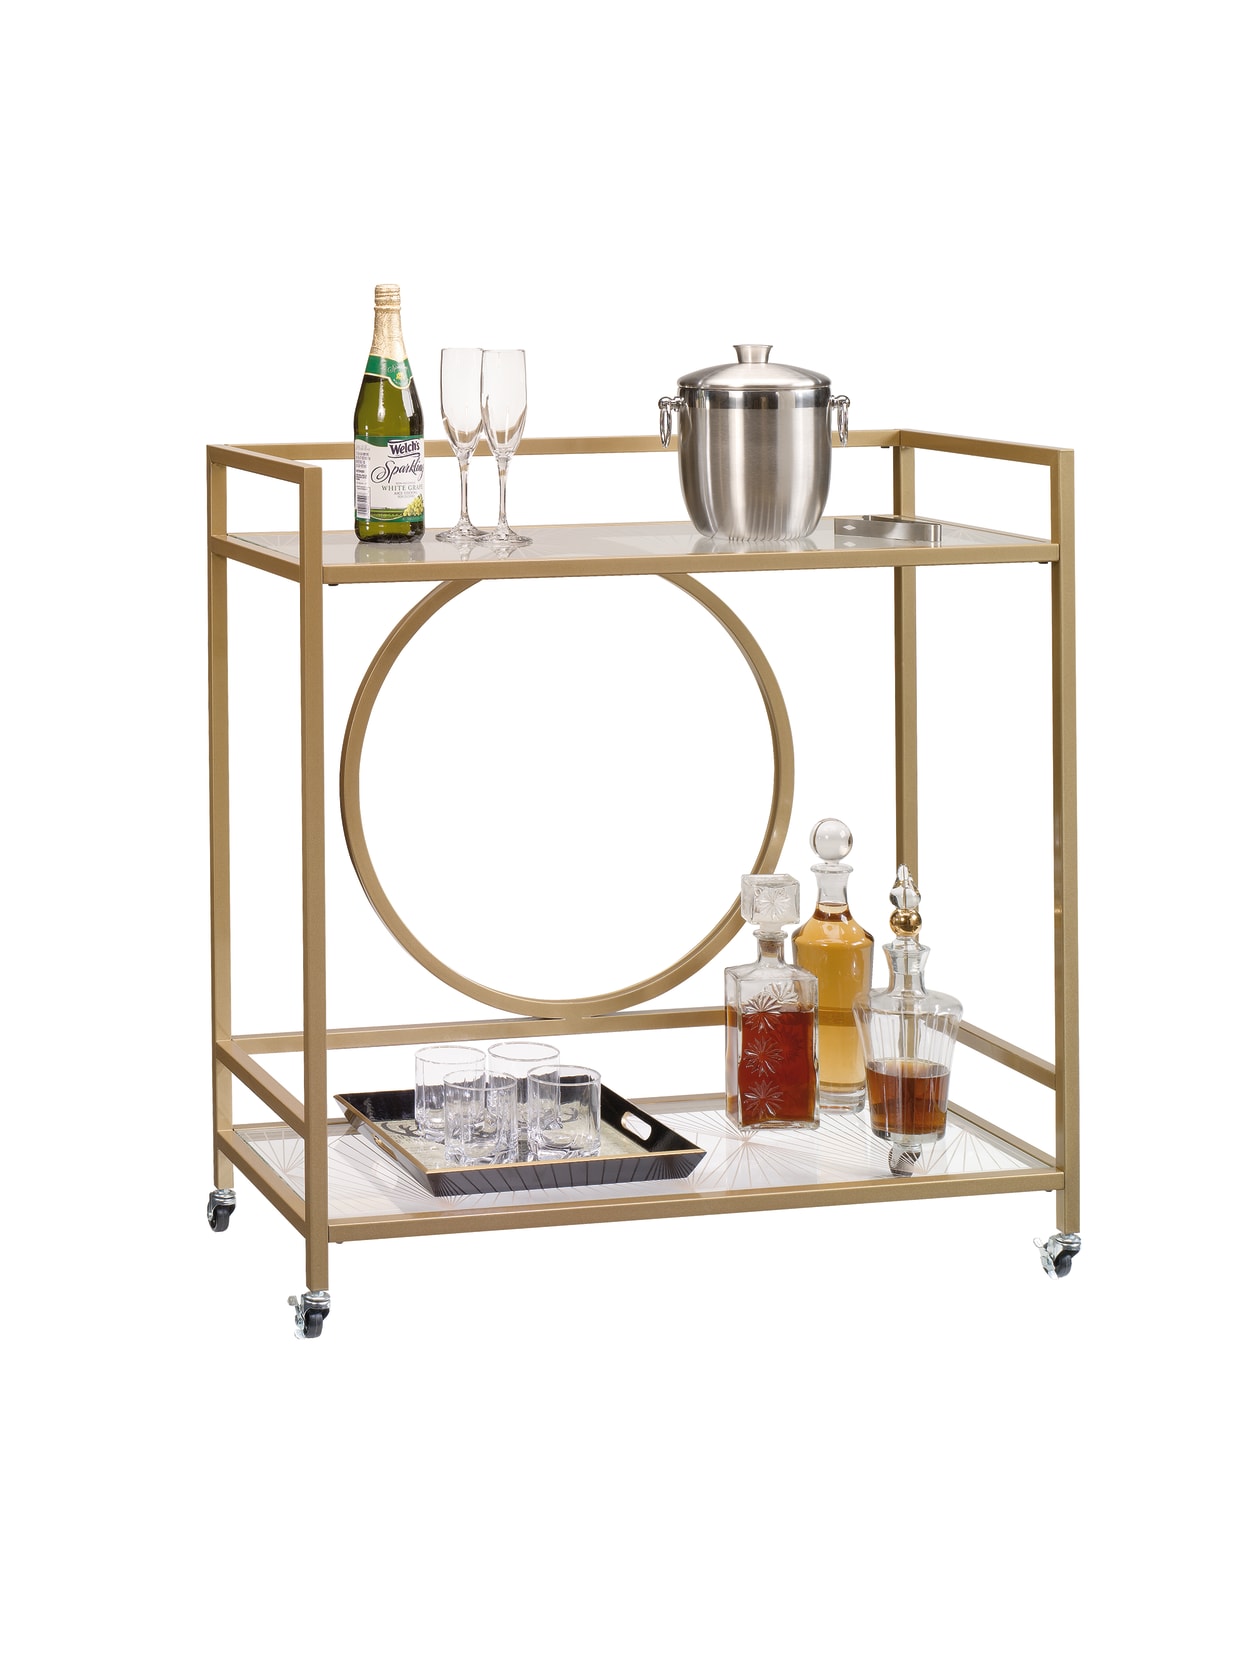 Sauder 417828 Lux Rolling Bar Cart Metal Construction in Satin Gold Finish New